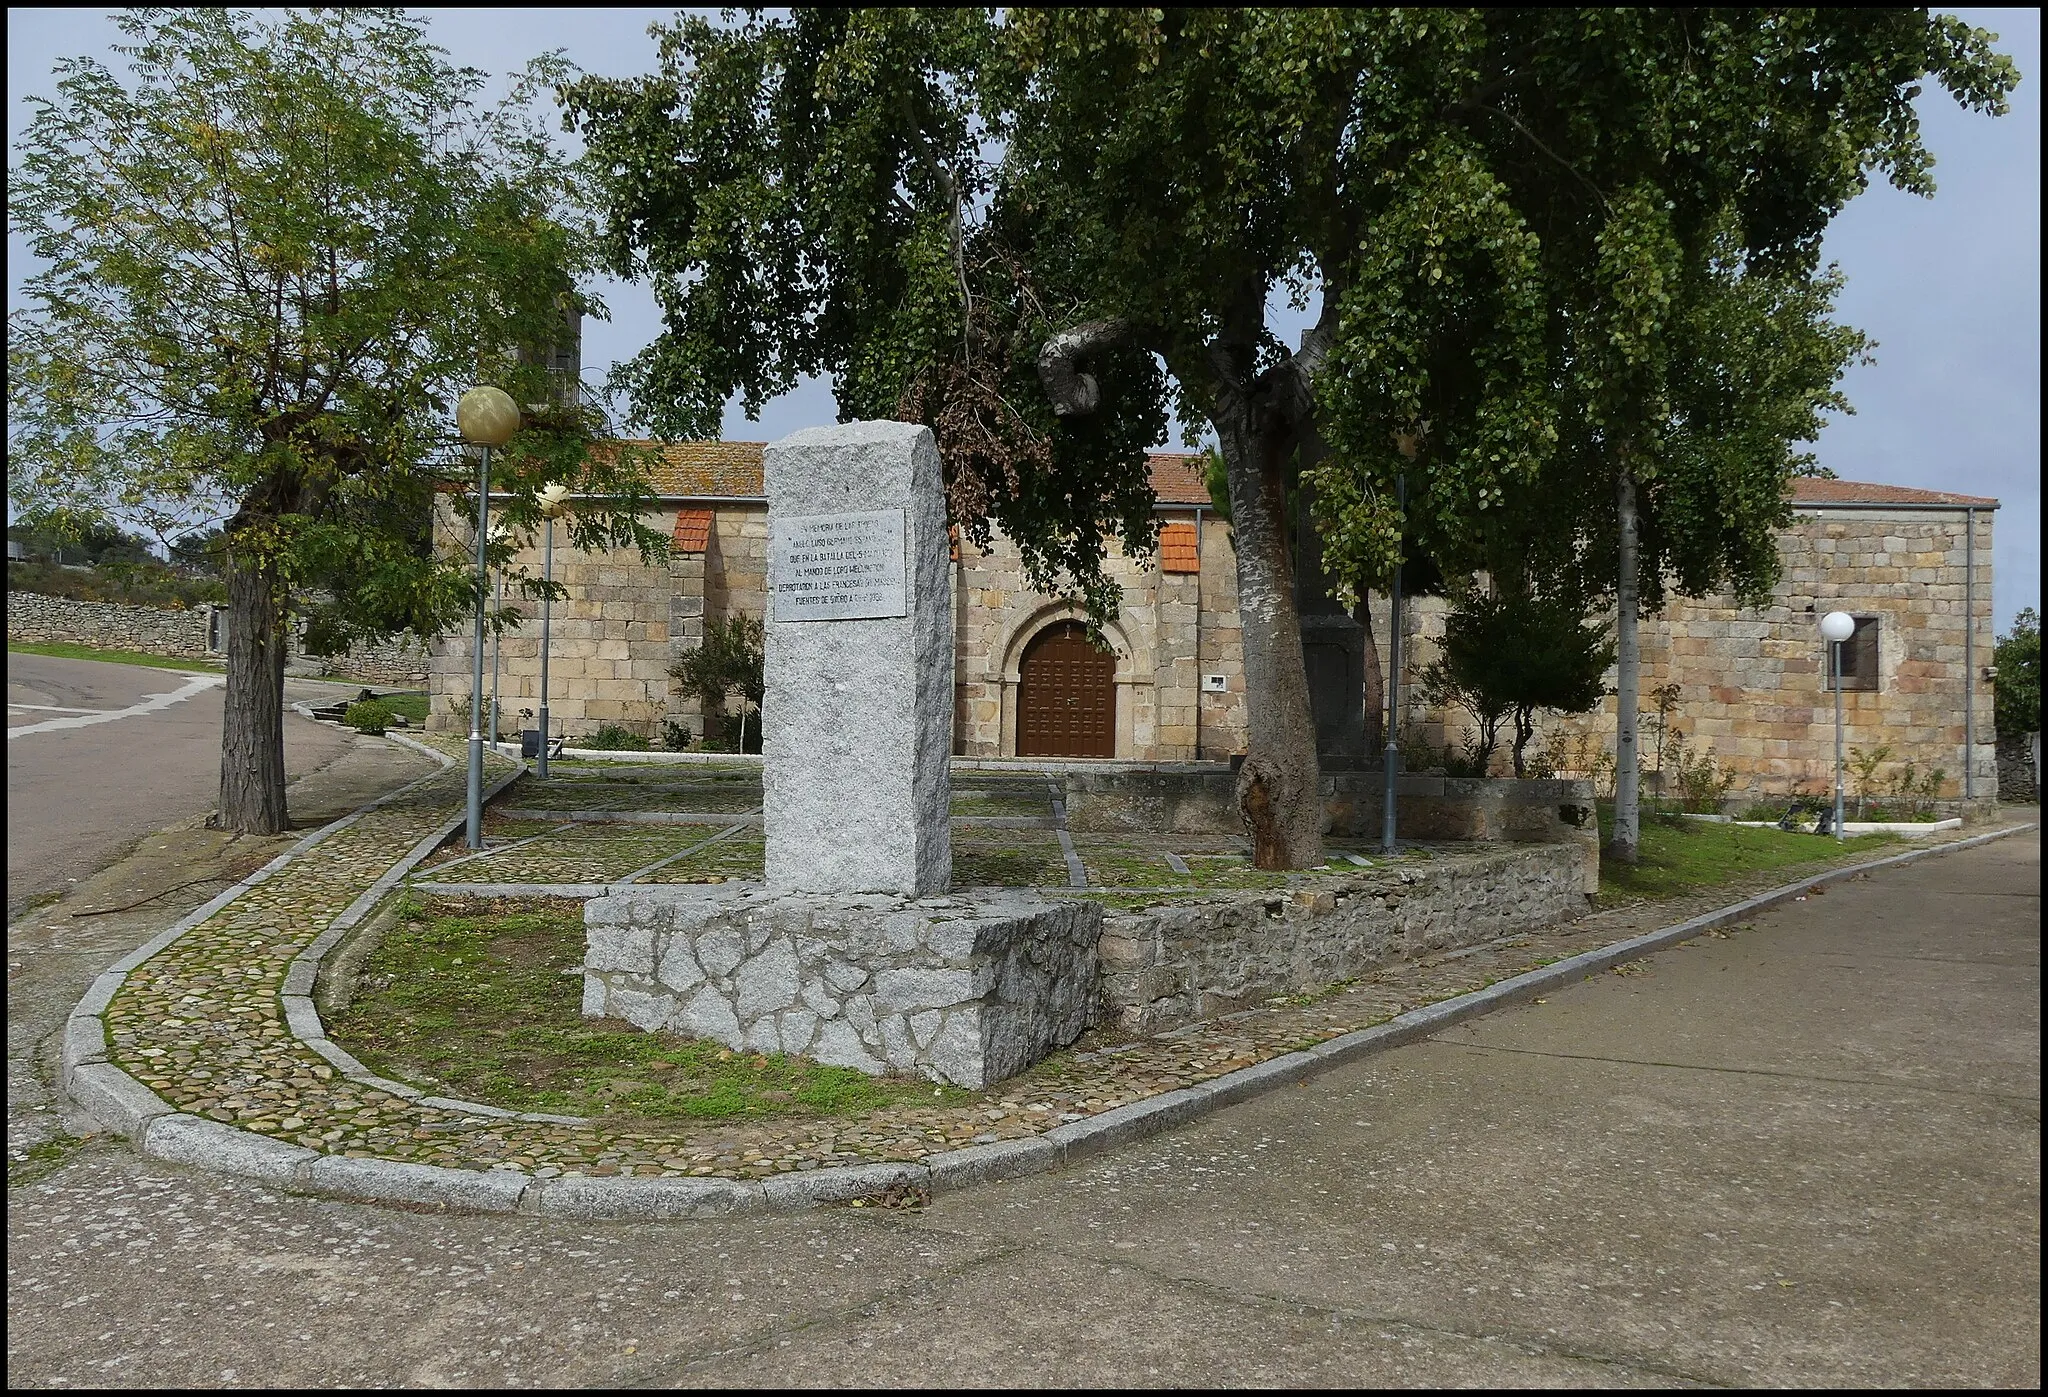 Photo showing: Commemorative plaque affixed to a standing stone erected near the front line of the fight against, and routing of, the French napoleonic invaders, thus putting an end to their Third Invasion of Portugal (July 1810 – May 1811).
The plaque reads :

En memoria de las tropas / "Anglo Luso Germano Españolas"  / que en la batalla del 5 Mayo 1811 / al mando de Lord Wellington / derrotaron a las francesas de Massena / Fuentes de Oñoro a 28 8 1986